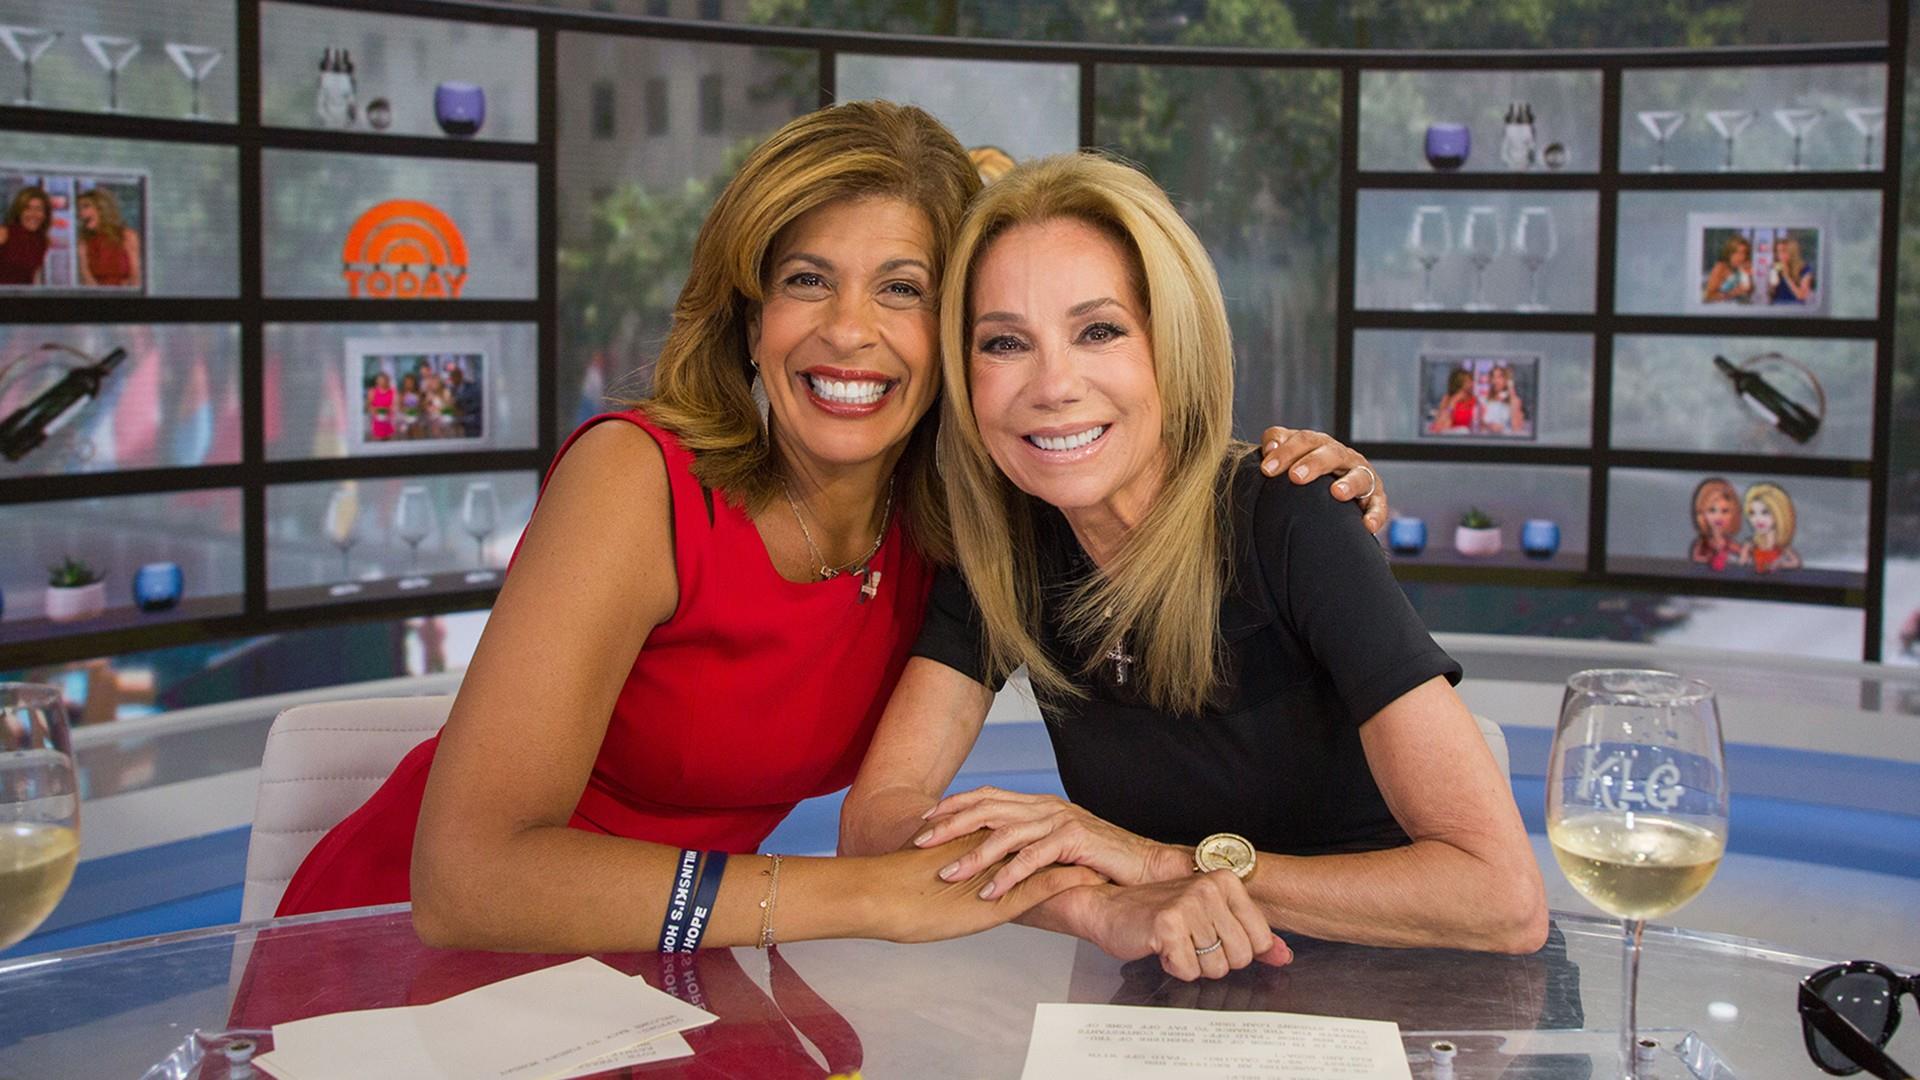 Kathie Lee’s favorite thing is her dress by Walker and Wade, which she desc...